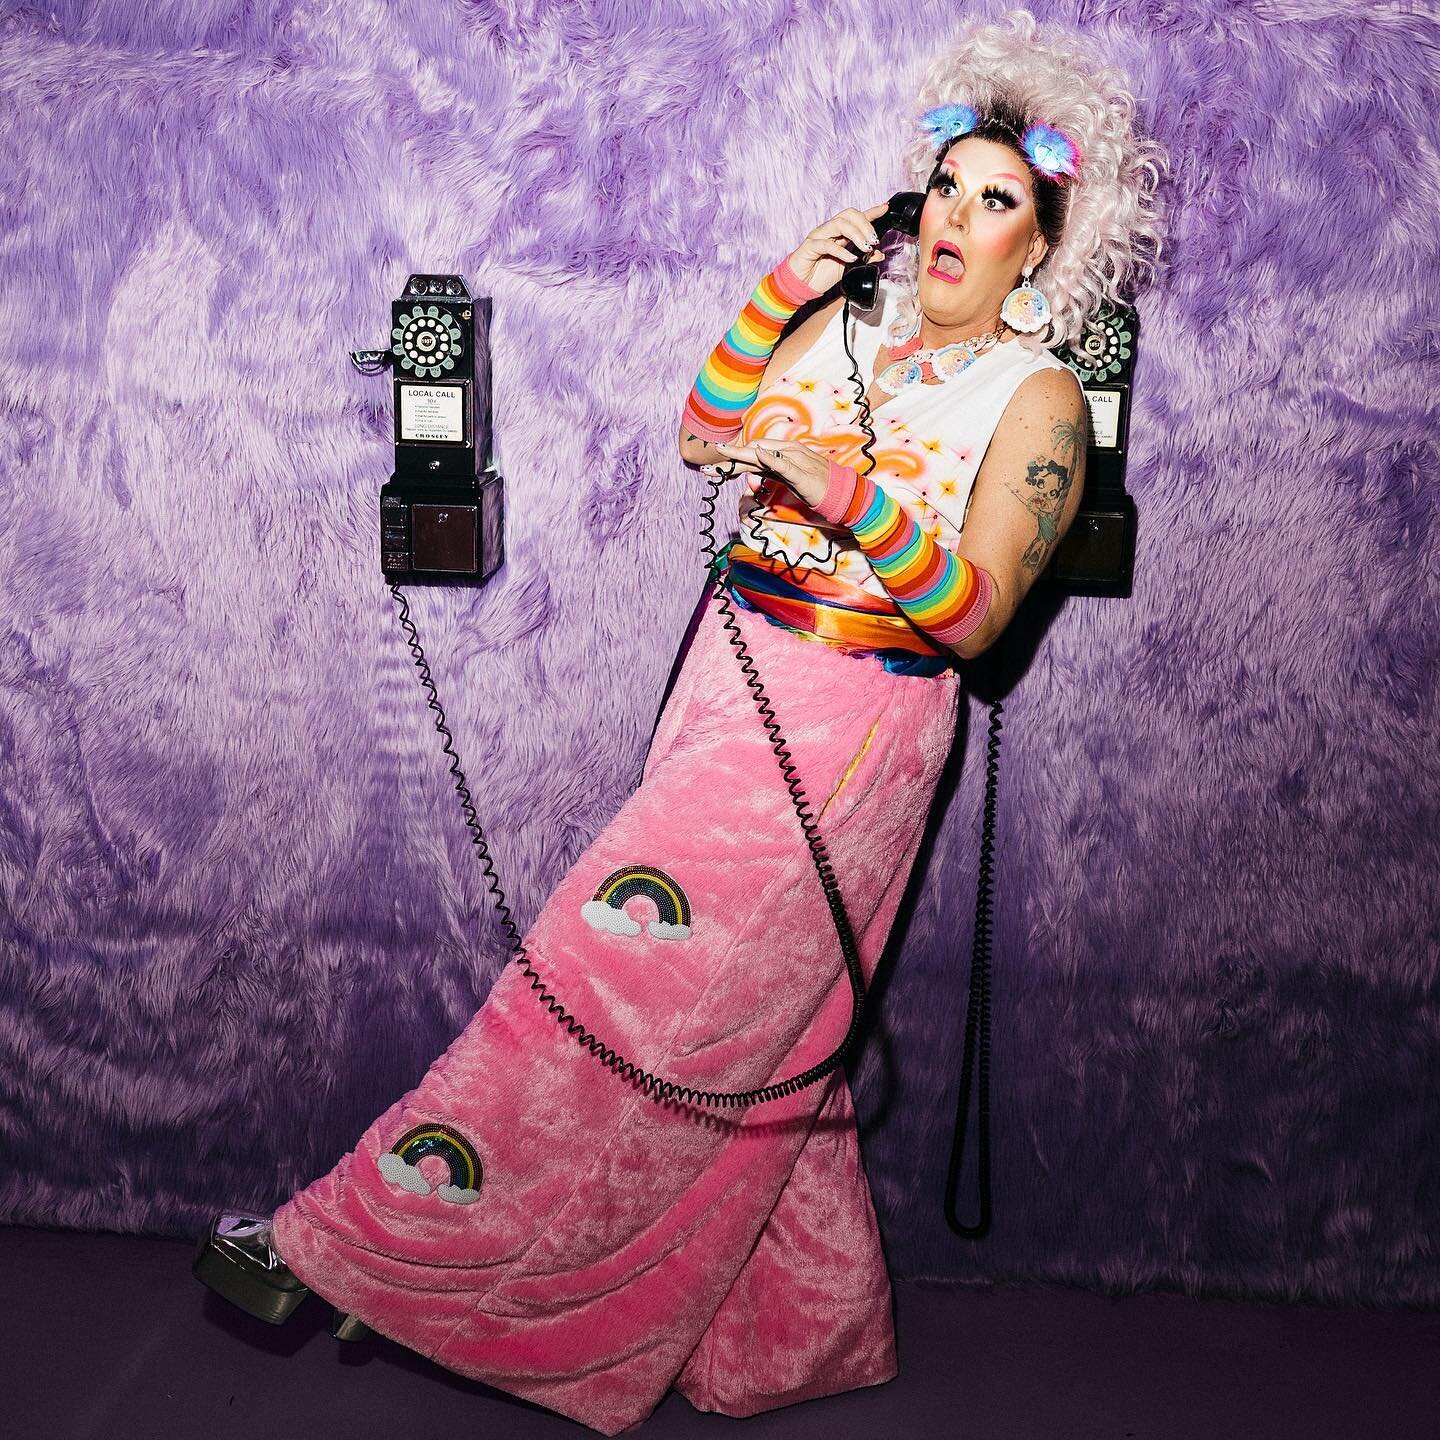 Just calling to see if you&rsquo;d like to renew your car&rsquo;s warranty?!? 📸 @jeremiahcorder #dragqueen @denverselfiemuseum #draglook #photooftheday #gayphotographer #ringadingding #drag #denverdrag #gaydenver #laughter #comedy #instagay #gayfitn